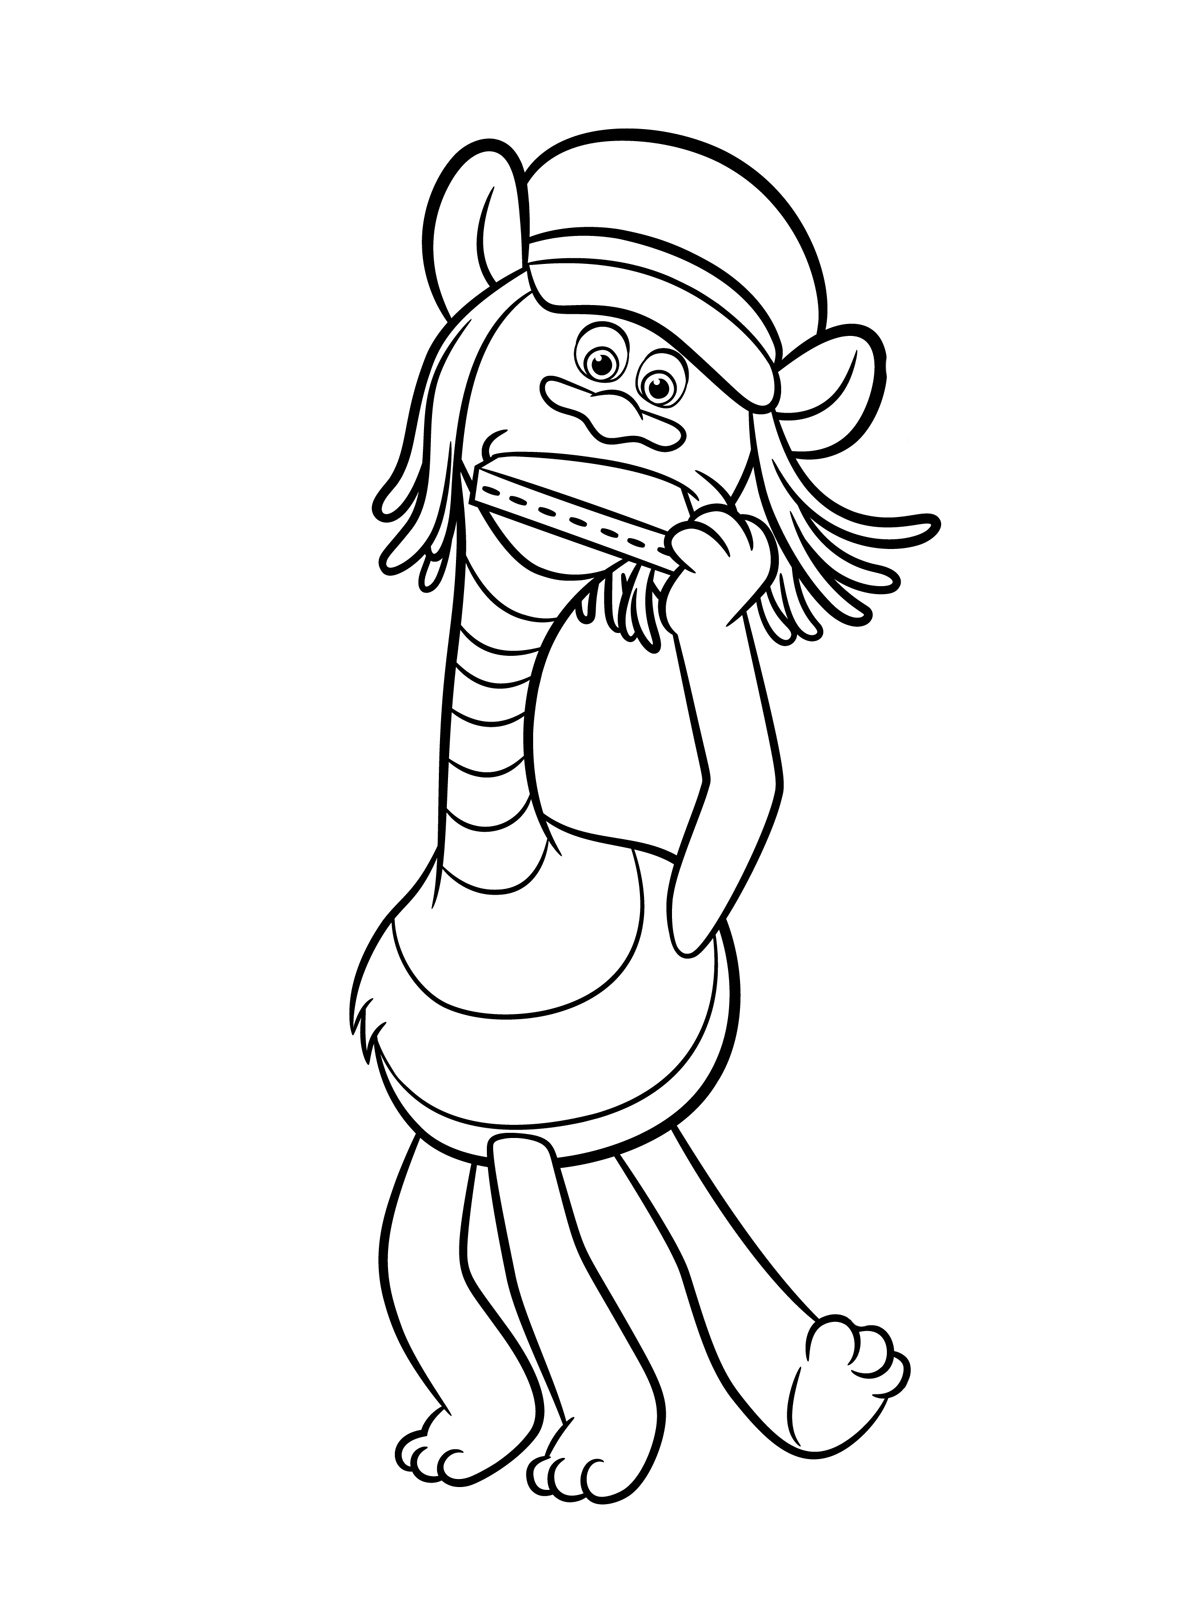 Free Dreamworks Trolls Coloring Pages at GetColorings.com ...